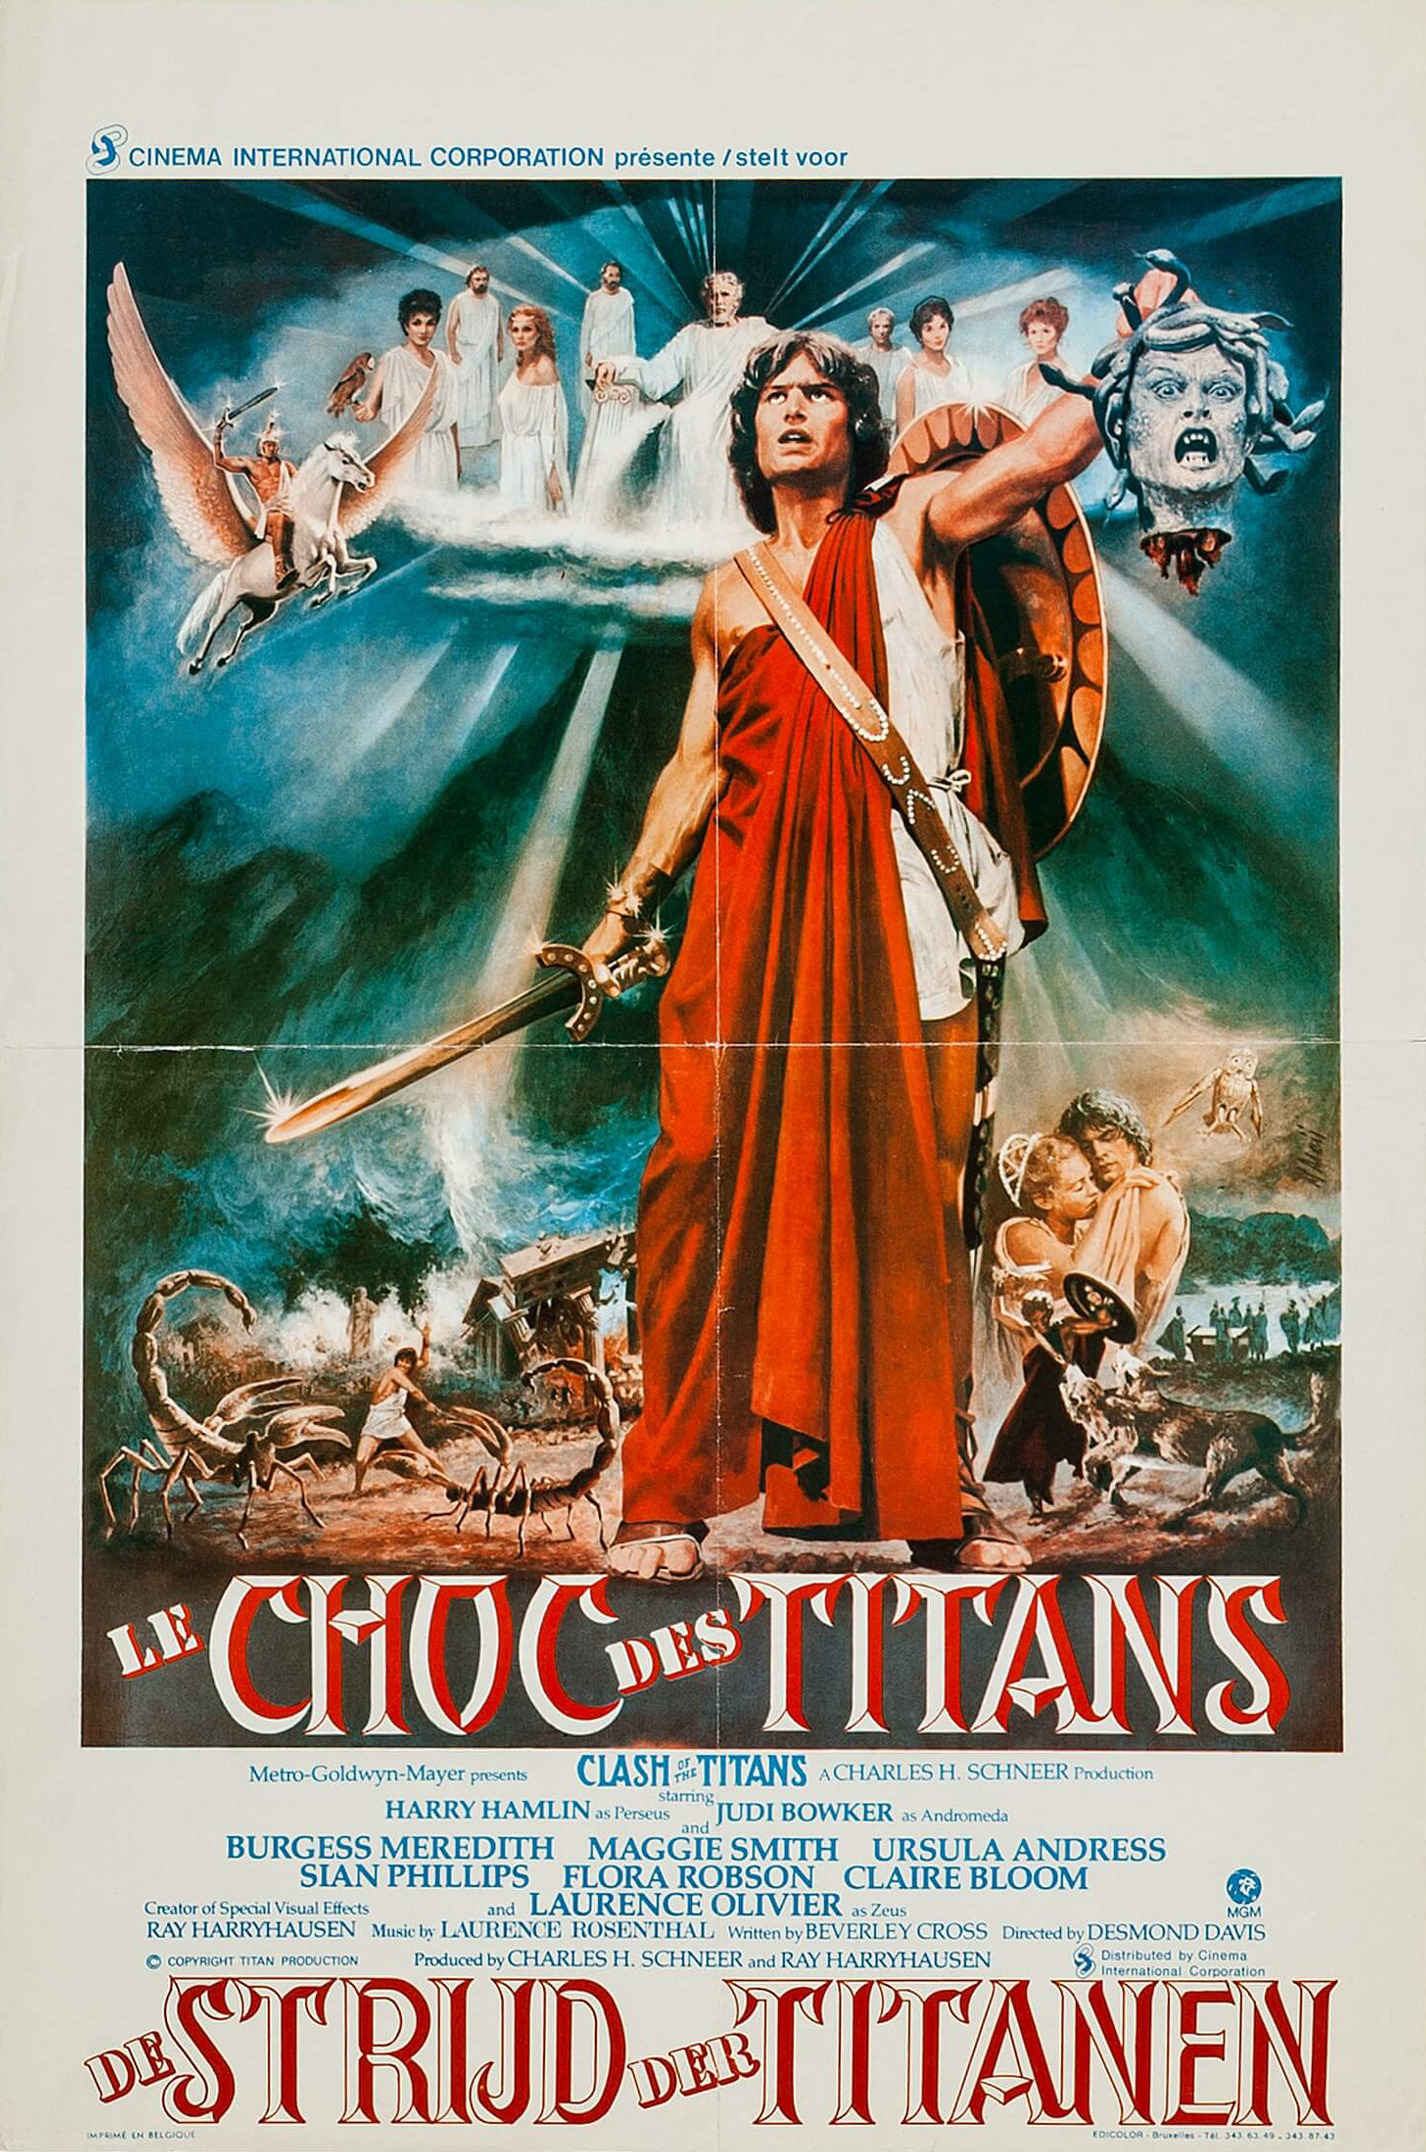 Clash of the Titans (1981) movie posters